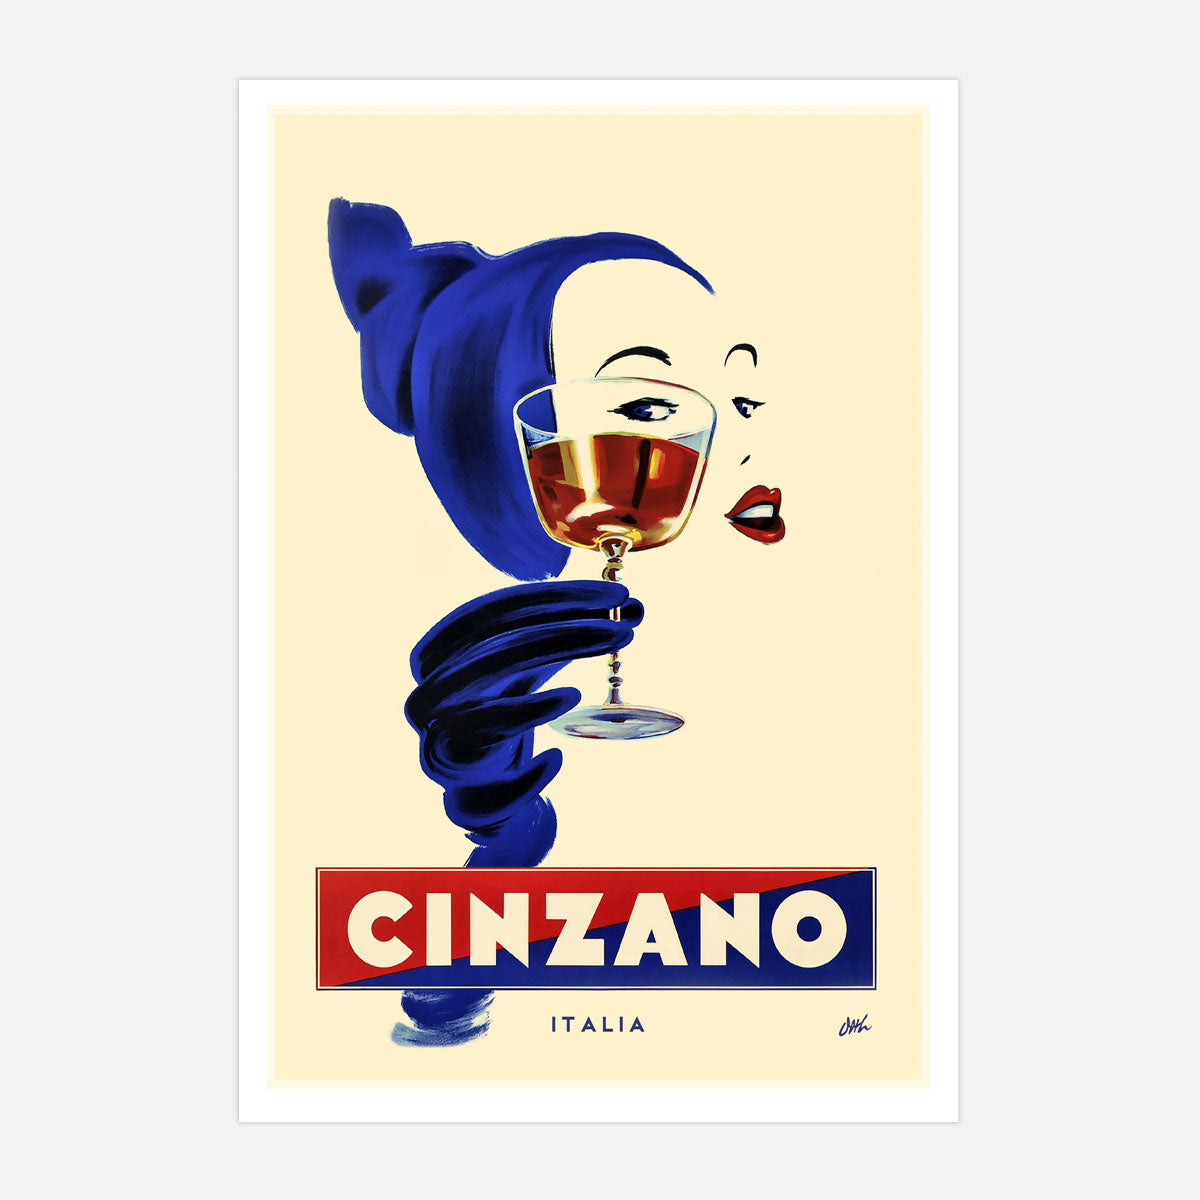 Cinzano retro vintage advertising poster print from Places We Luv